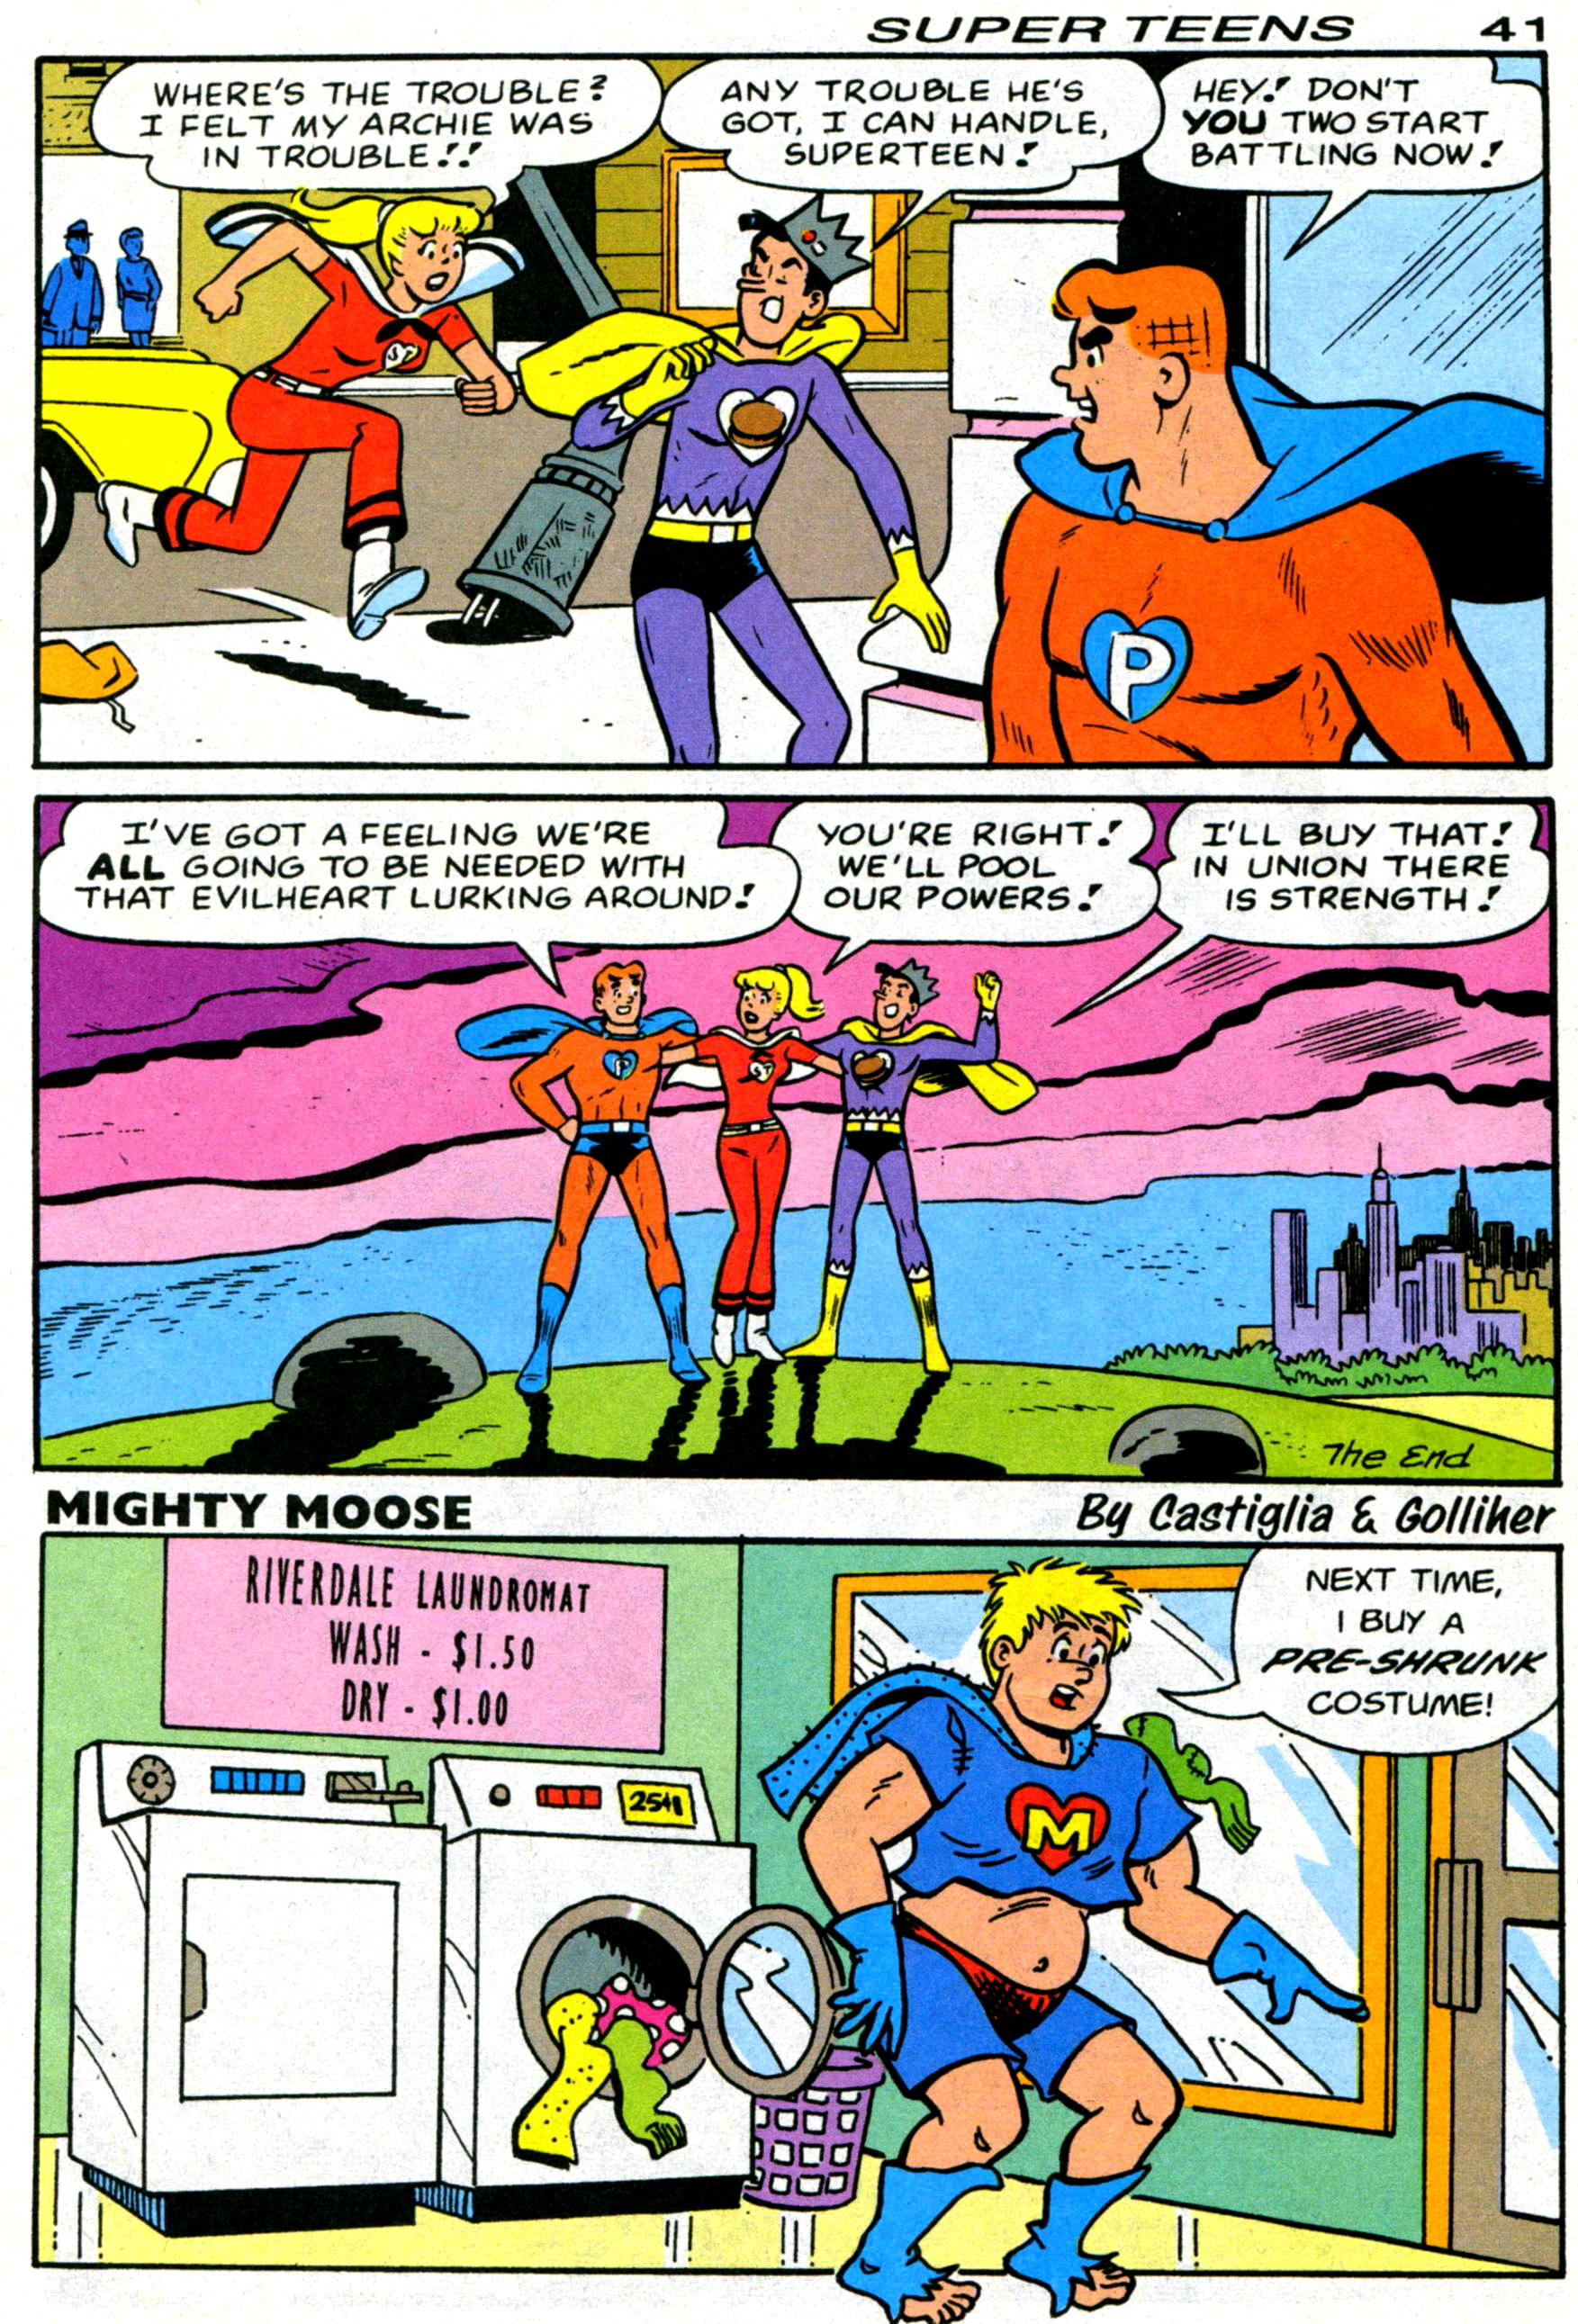 Read online Archie's Super Teens comic -  Issue #1 - 43